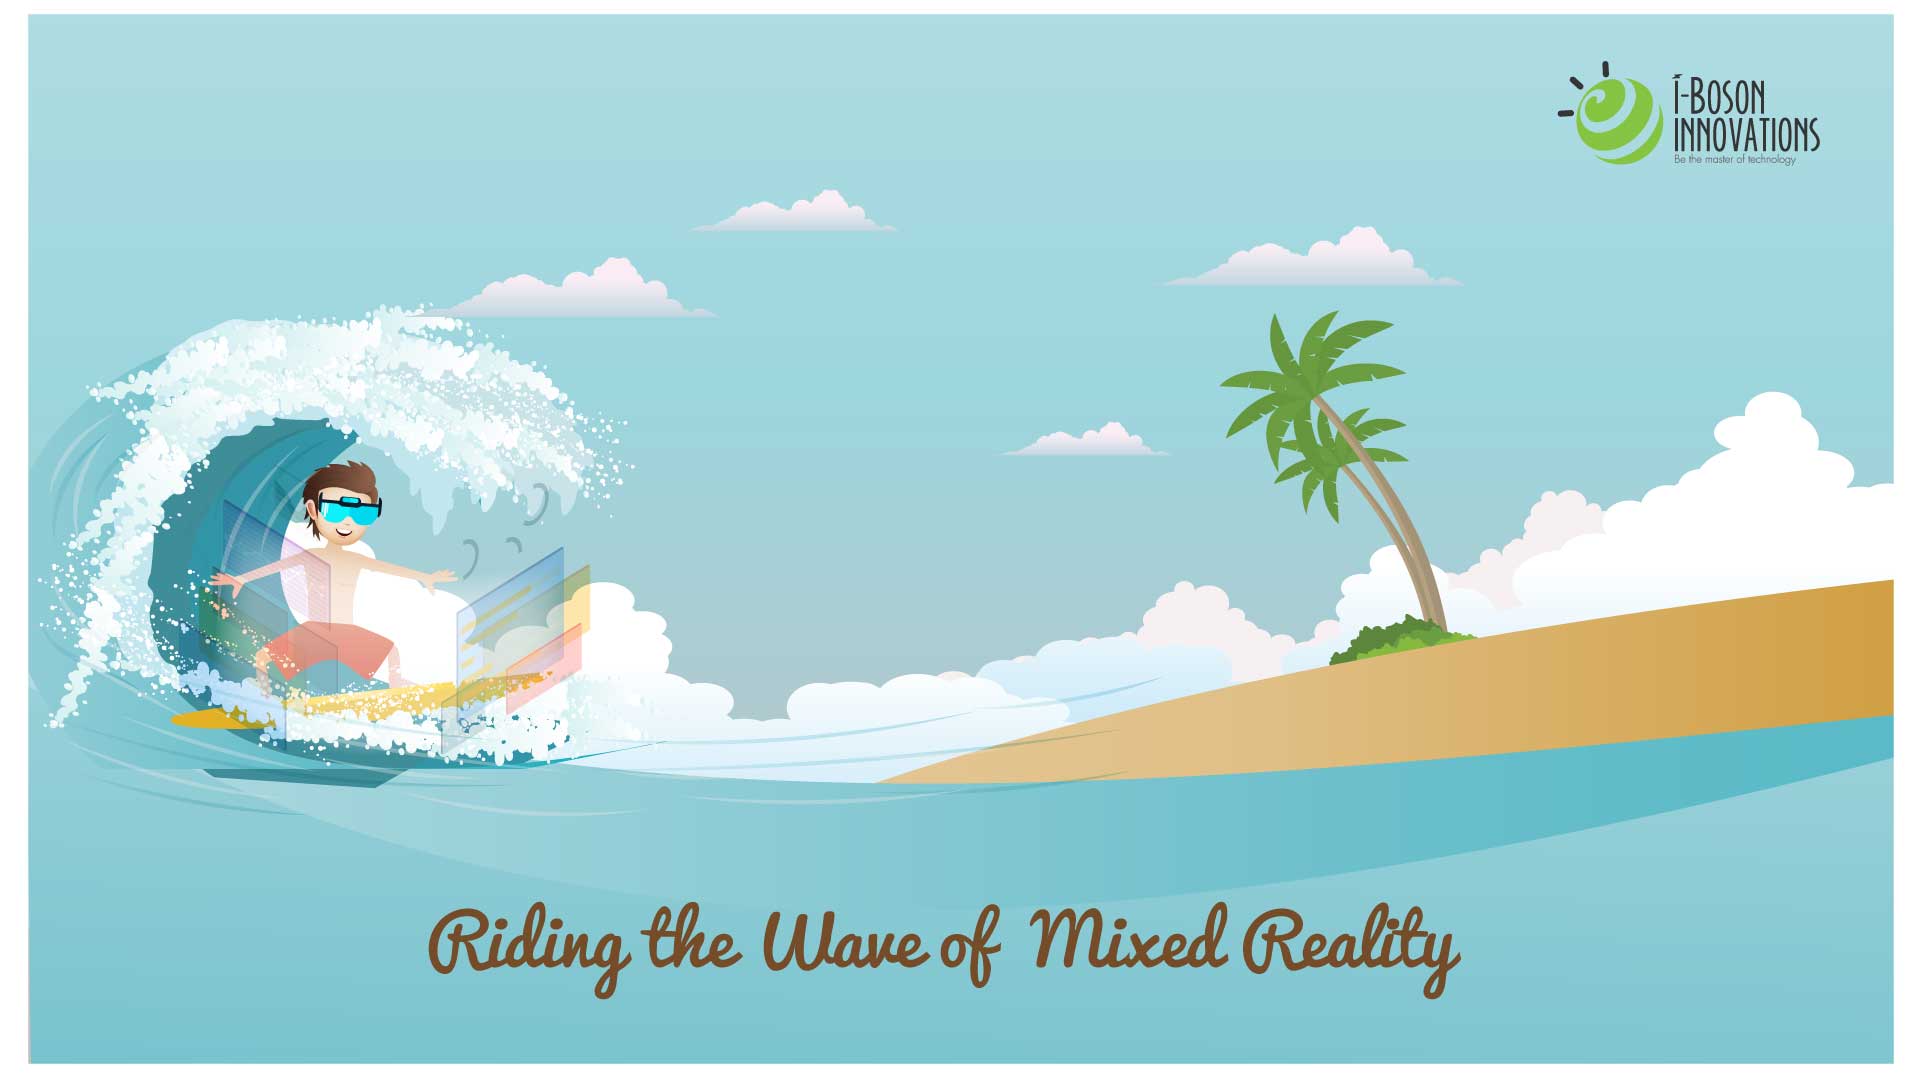 Riding the wave of mixed reality